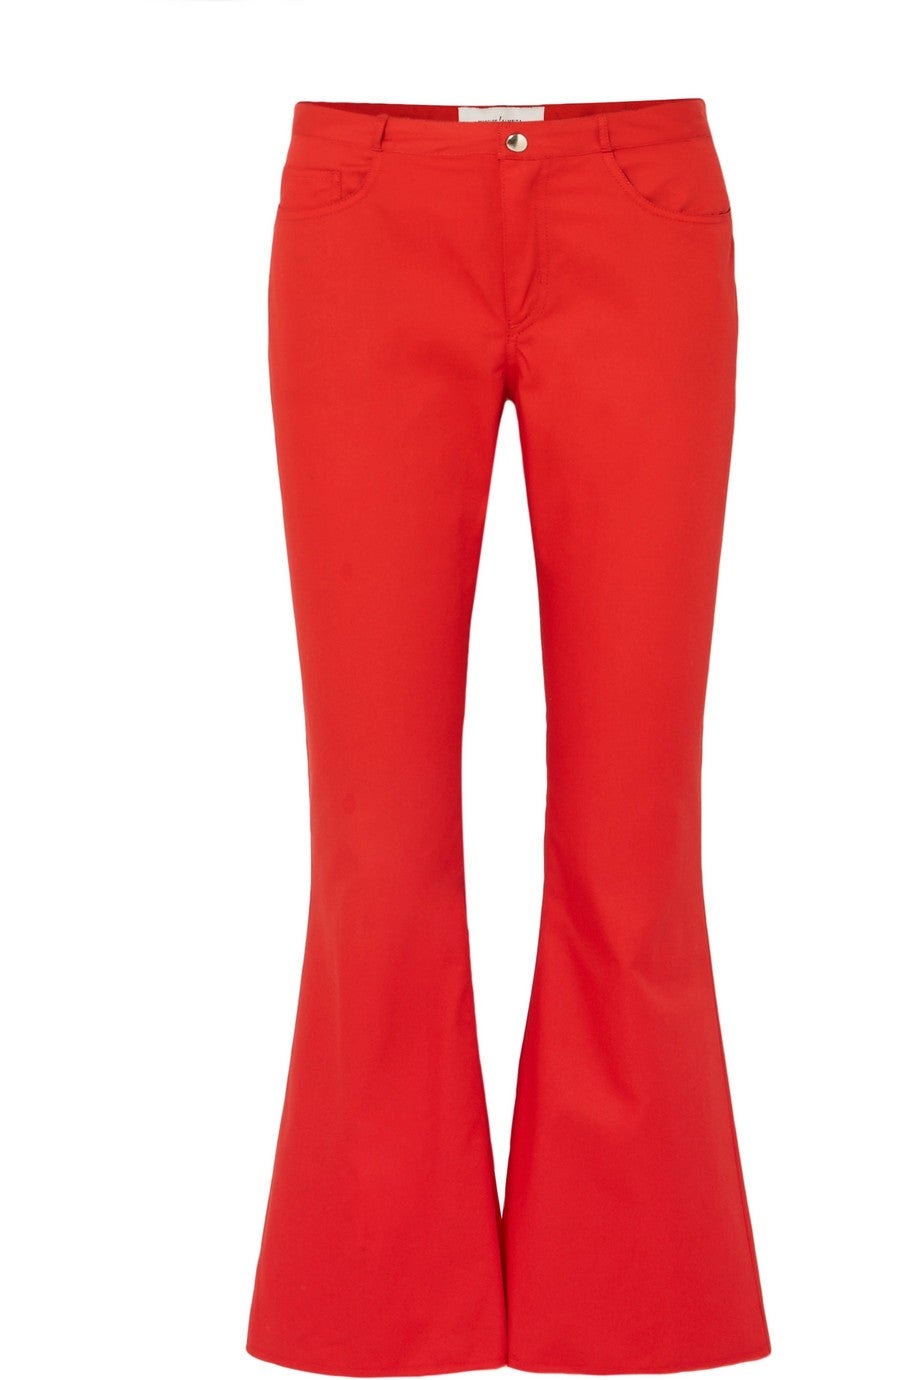 Marques Almeida red pant